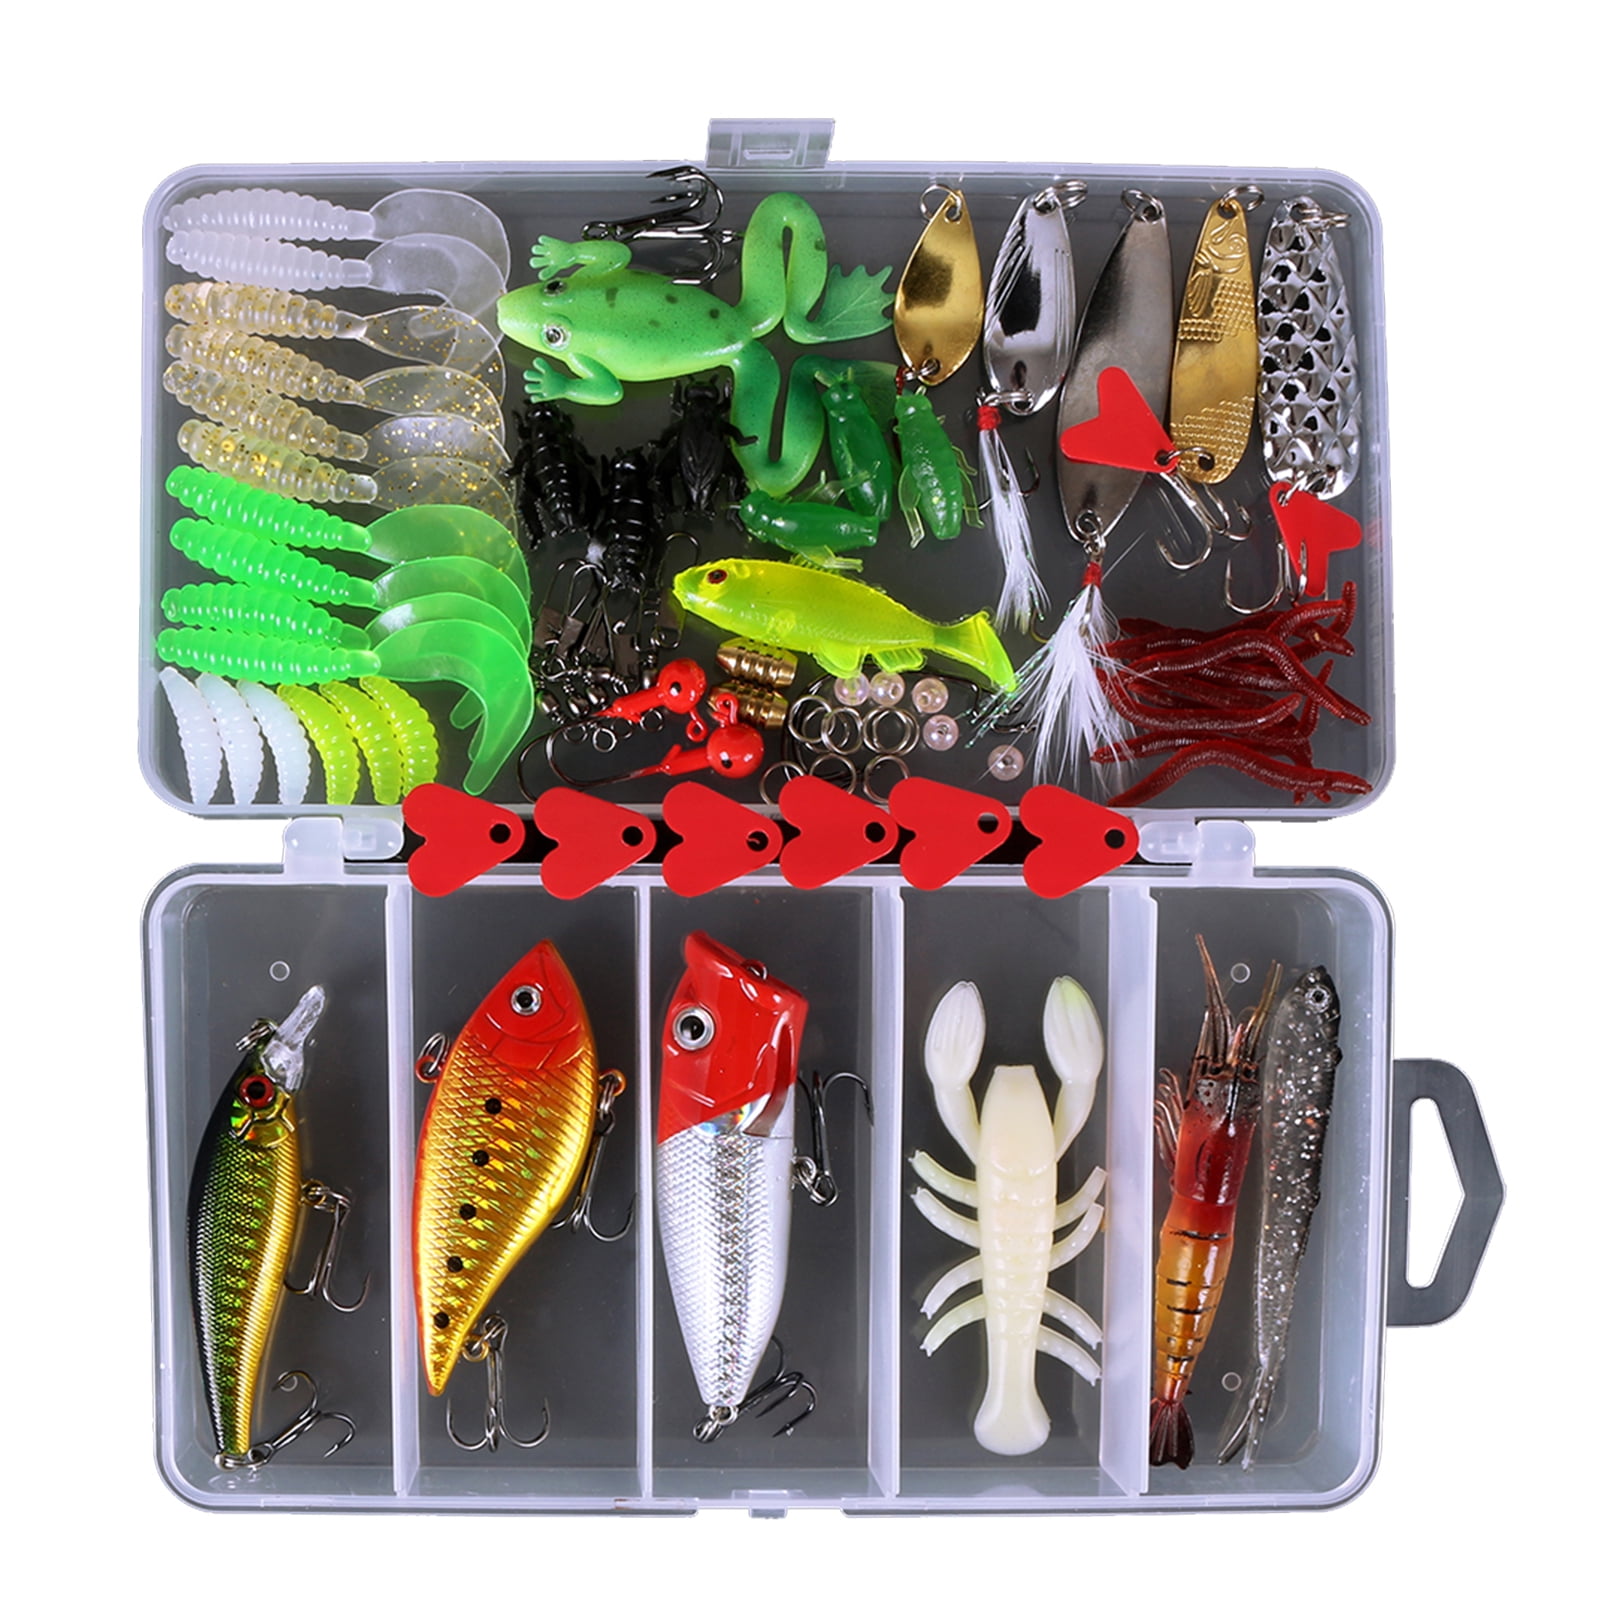 Sea Striker ShurStrike Gold Plated/Red Lure Tab Casting Spoon - Gold  Plated/Red Tab, 1/2oz